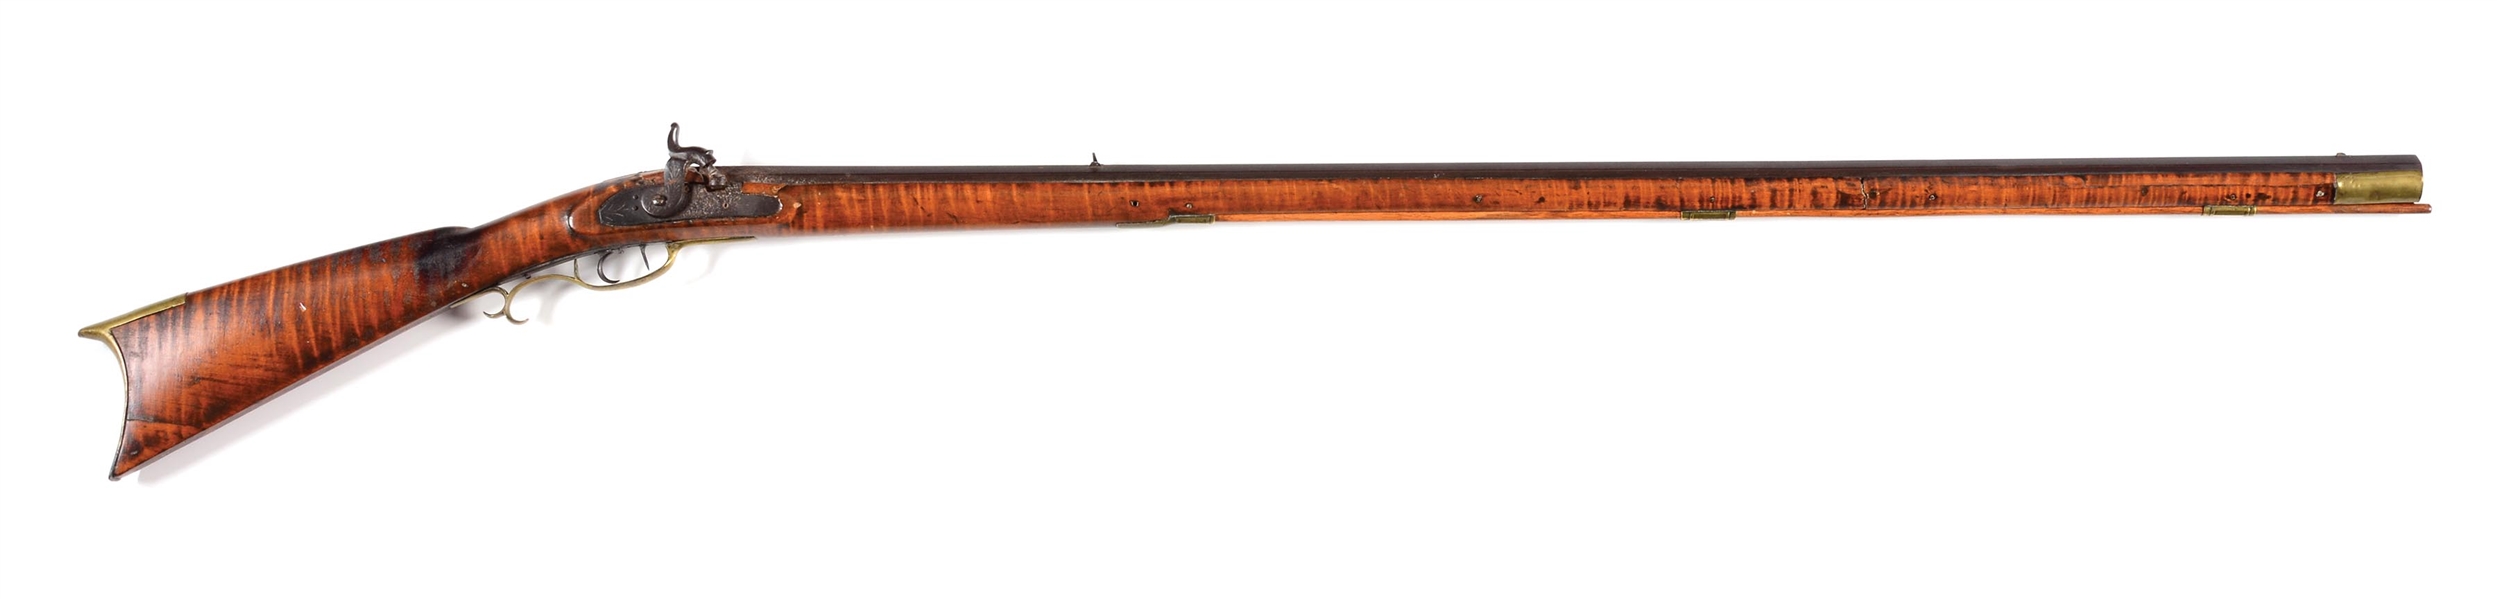 (A) PERCUSSION LONG RIFLE BY J.S. SUMMERS.